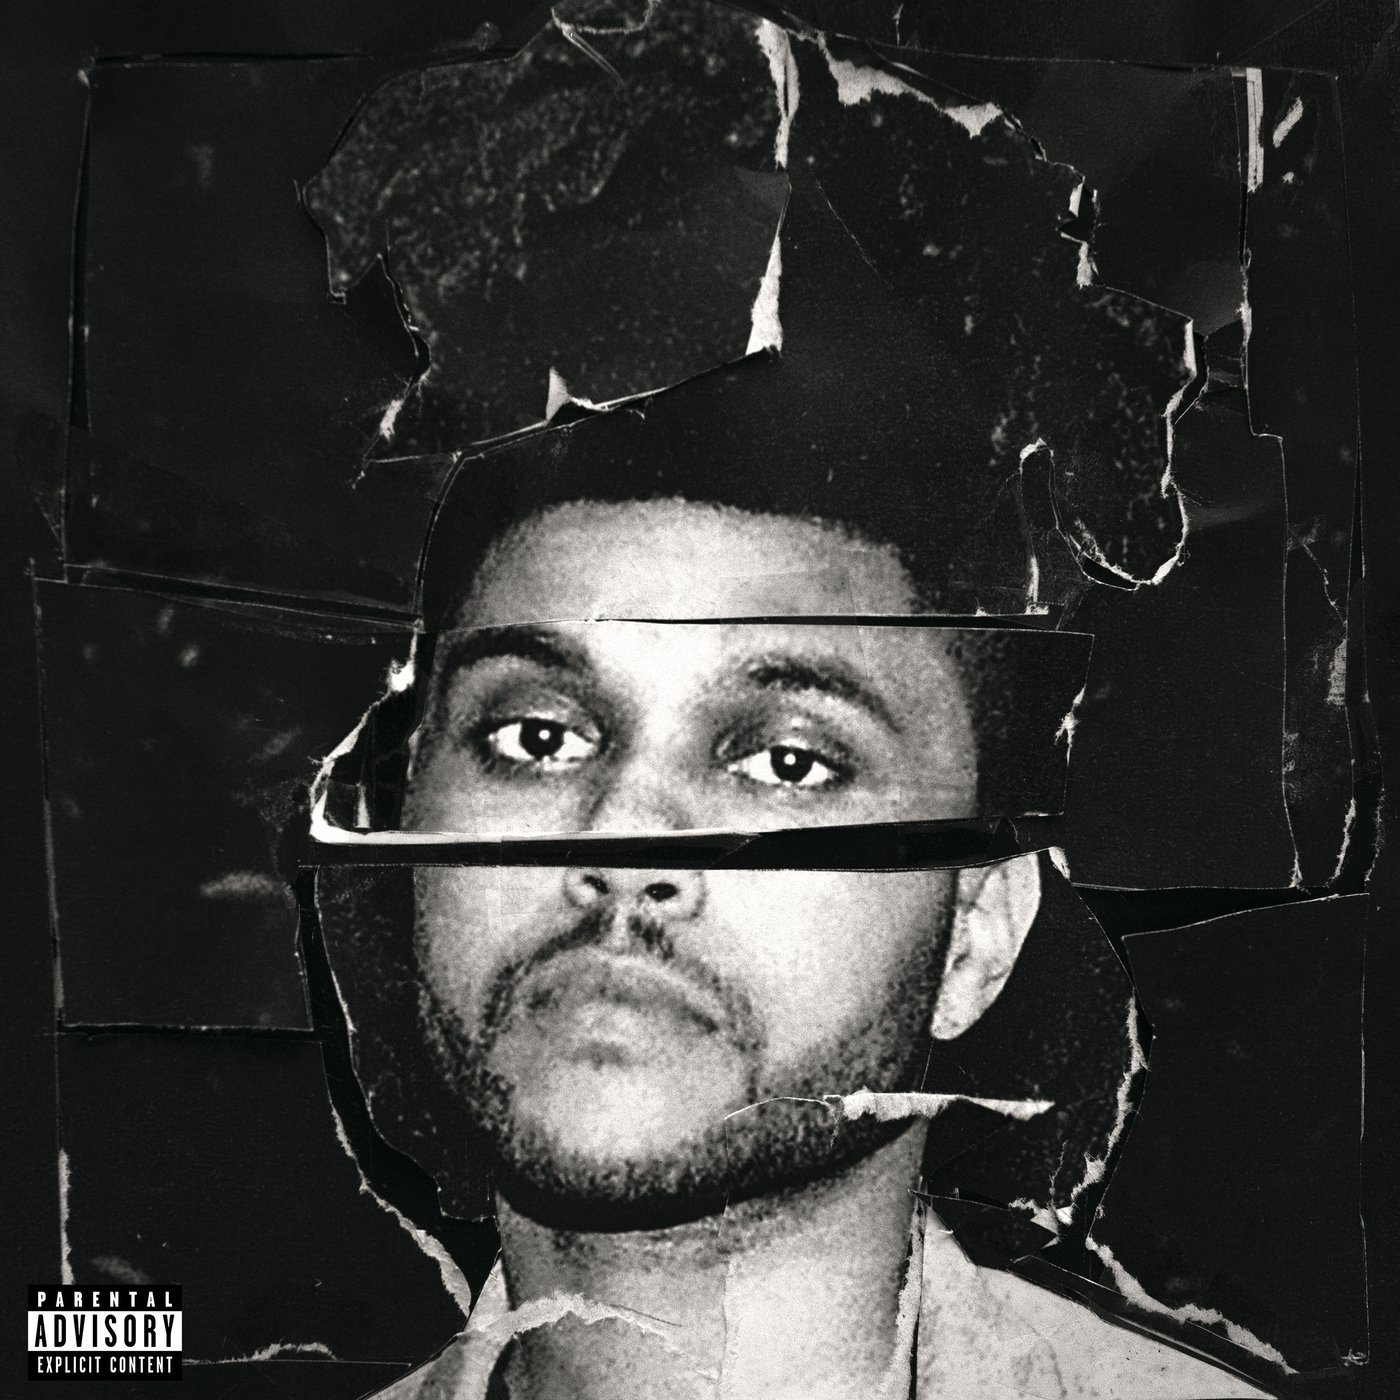 THE WEEKND CD 2015